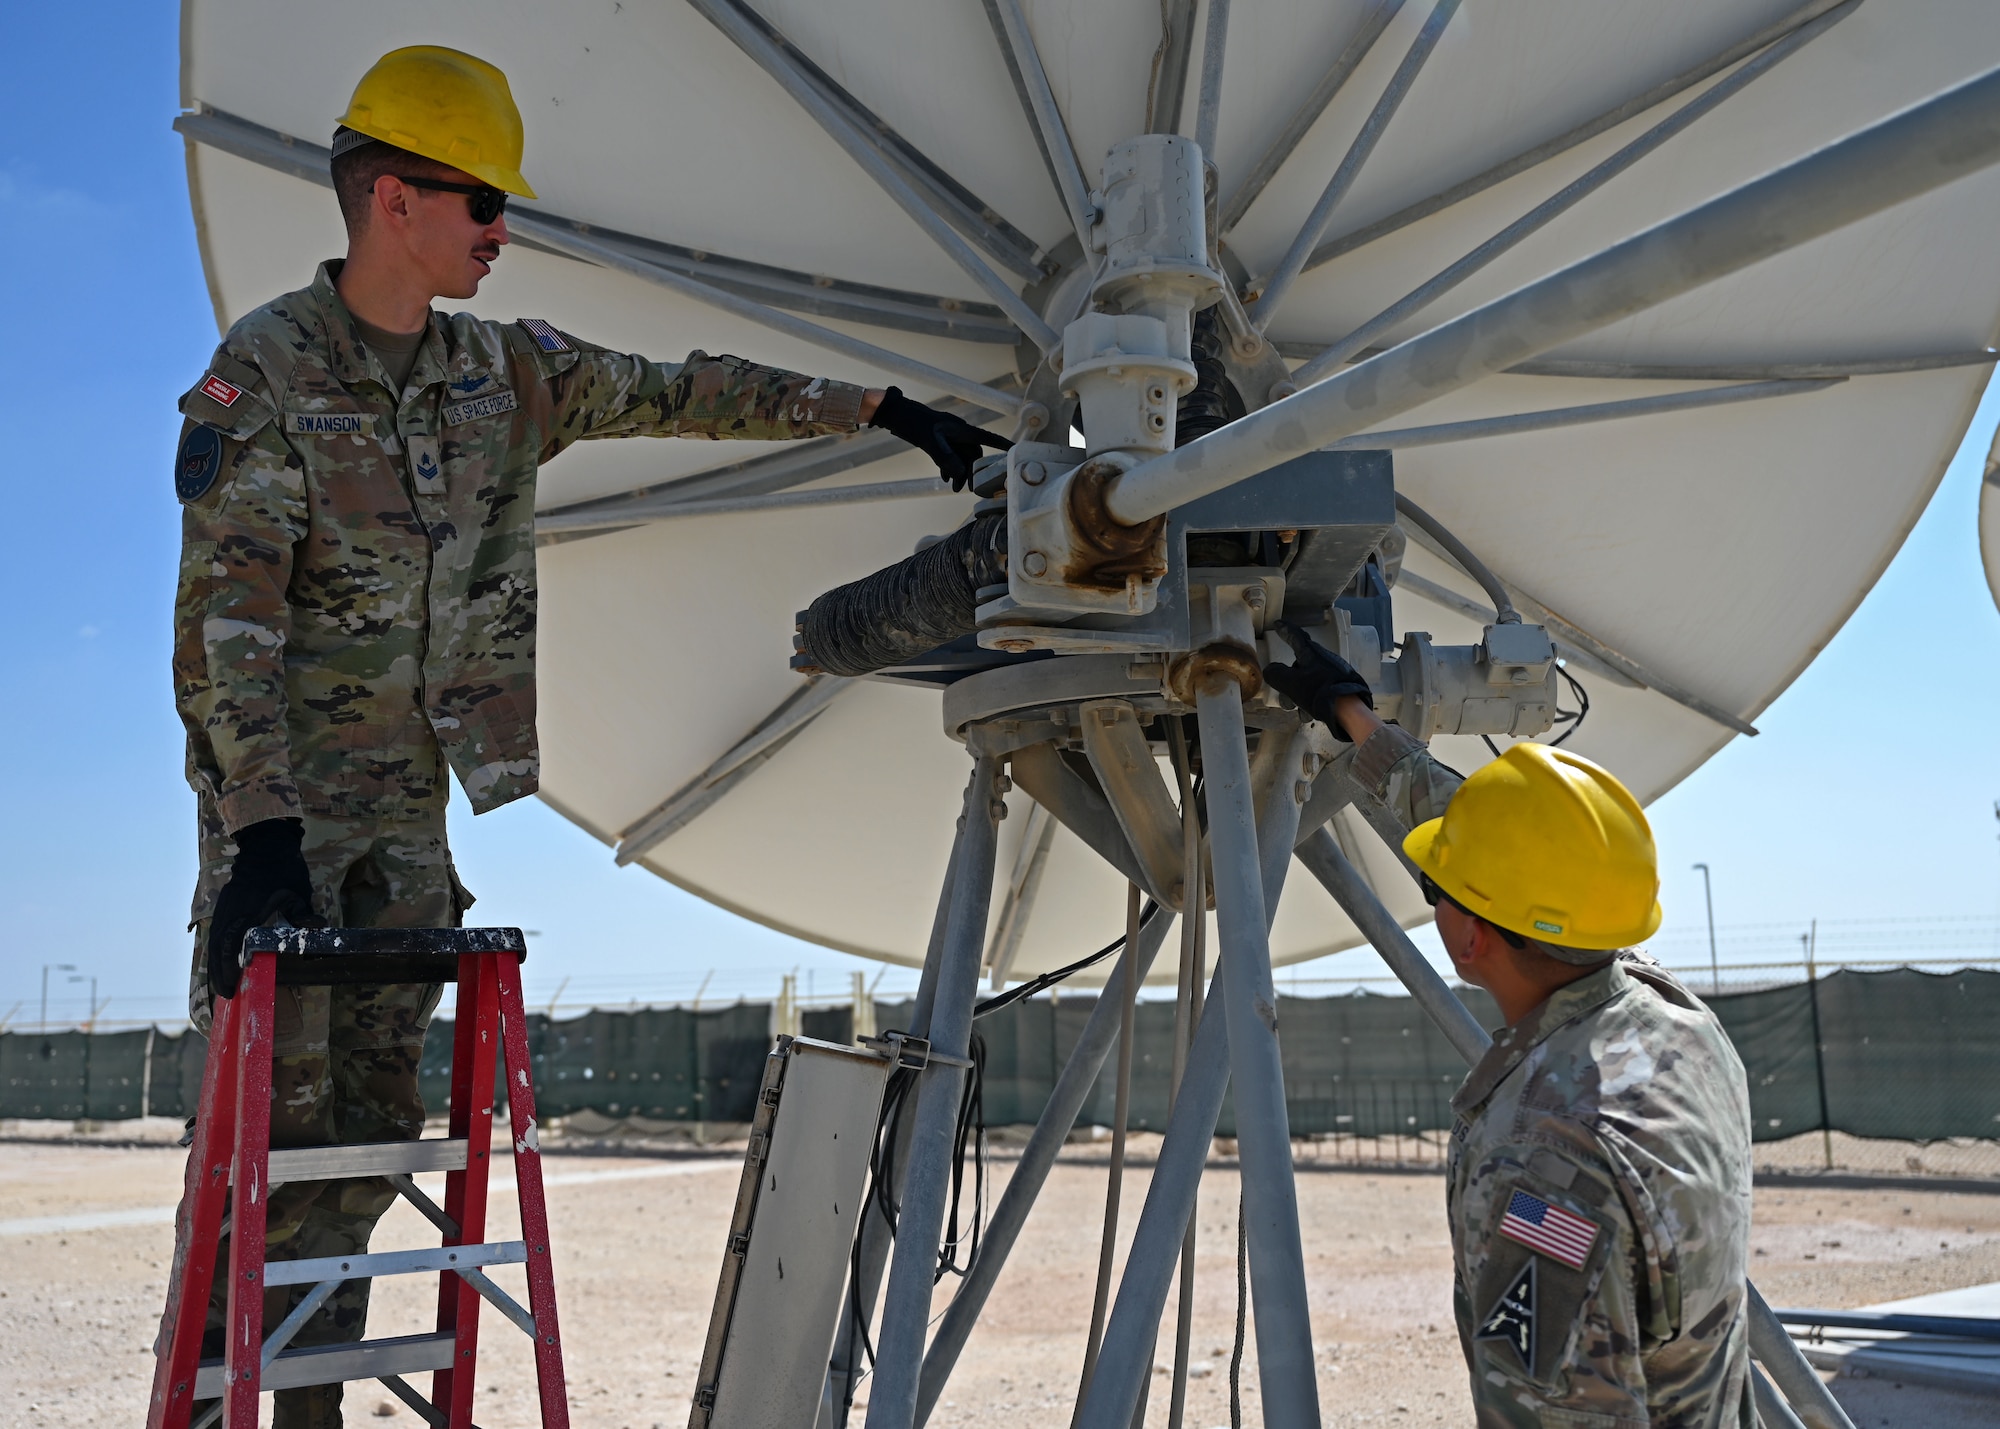 U.S. Space Force Sgt. Mitchell Swanson, left, 5th Space Warning Squadron Detachment 2 systems evaluator, and U.S. Space Force Capt. Steven Torres, right, 5th SWS Detachment 2 commander, inspect a ground antenna at an undisclosed location in the U.S Central Command area of responsibility, Oct. 27, 2023. The 5th SWS Detachment 2 was recently activated to assume the Joint Tactical Grounds Station mission from the U.S. Army. (U.S. Air Force photo by Senior Airman Sarah Williams)